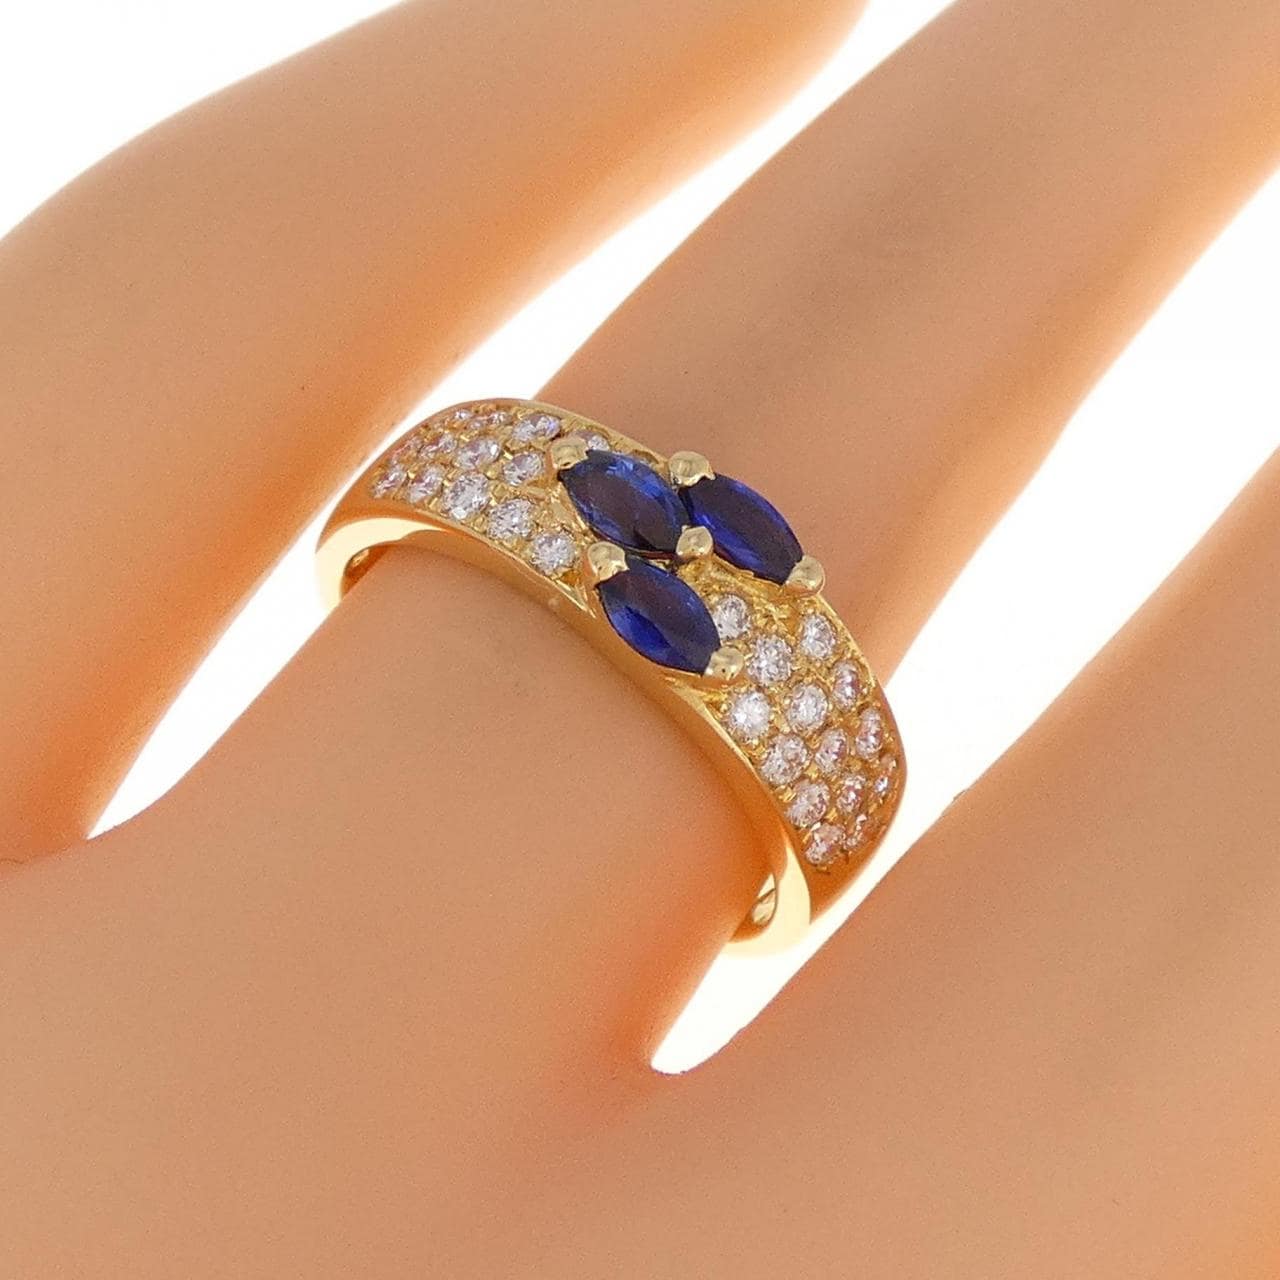 Queen sapphire ring 0.45CT